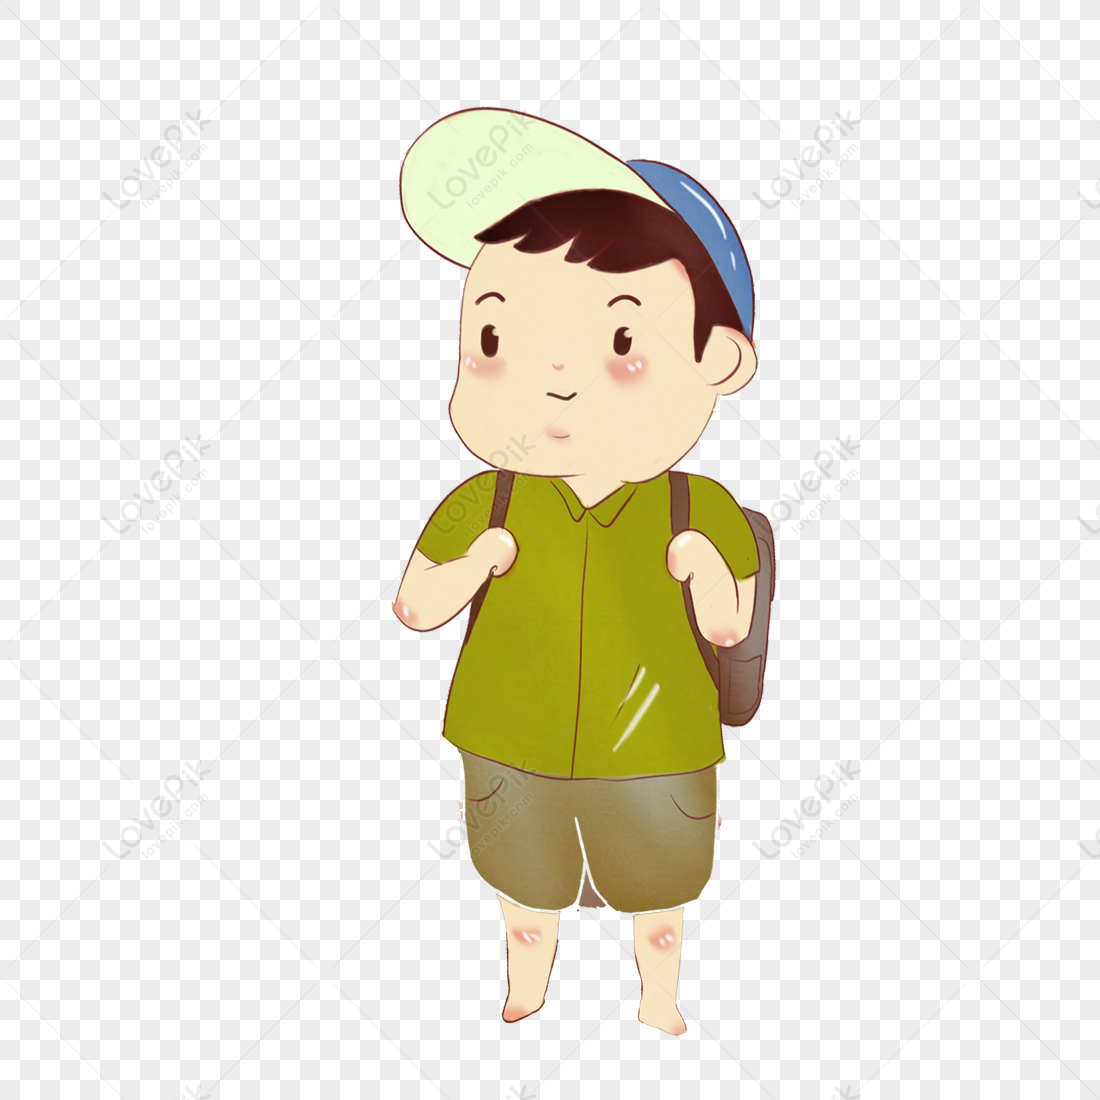 Cartoon Male Student PNG Transparent Background And Clipart Image For Free  Download - Lovepik | 400497020